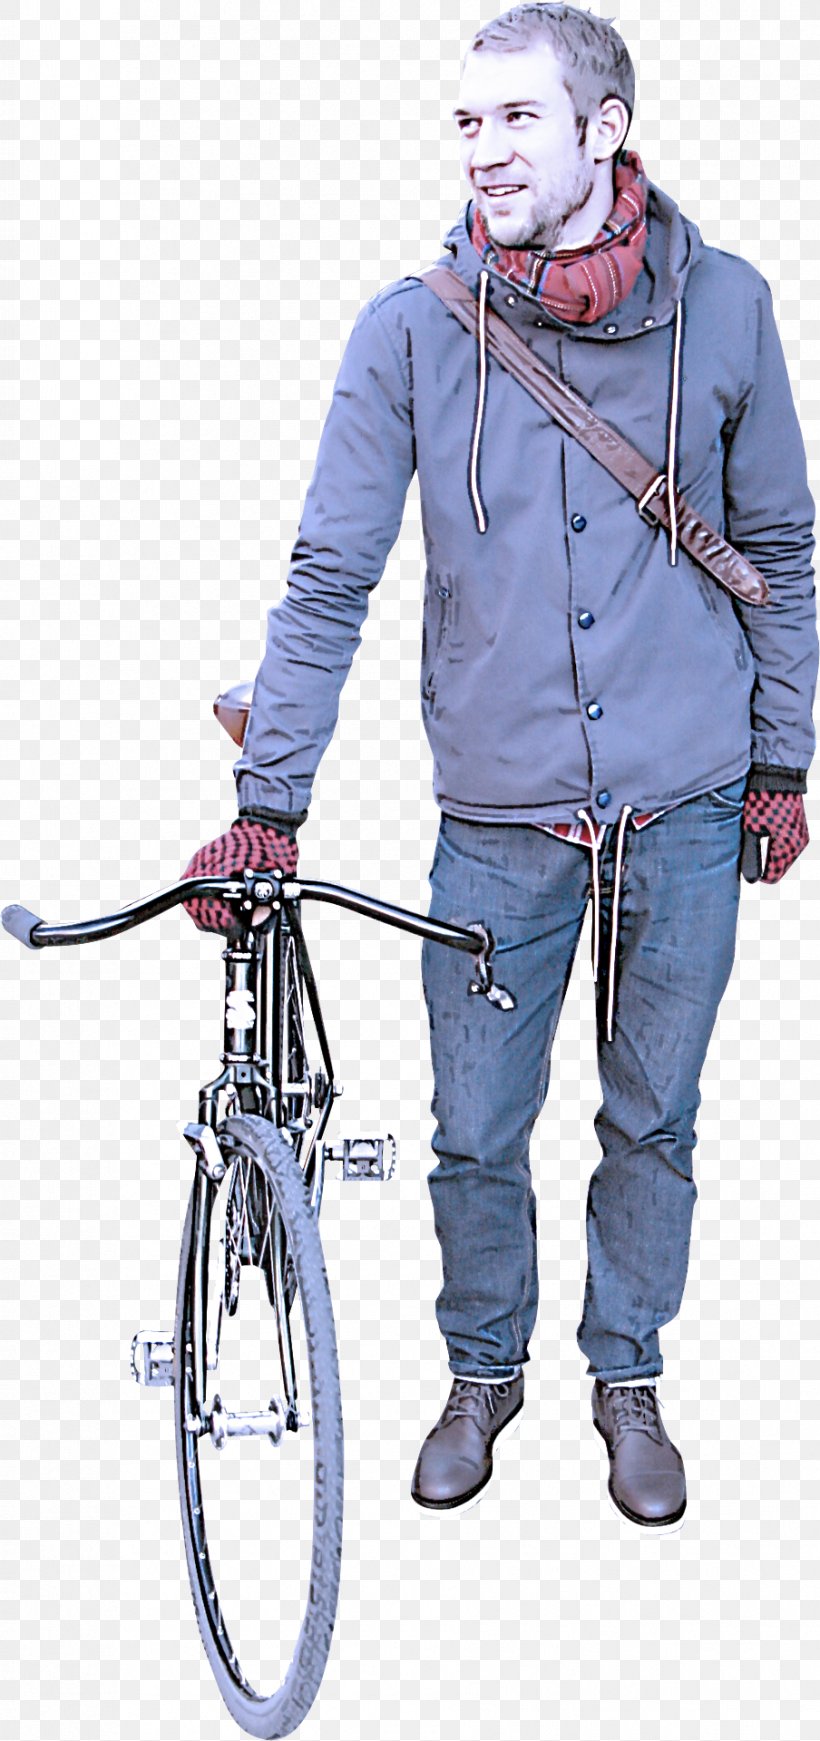 Bicycle Part Jeans Bicycle Wheel Clothing Bicycle, PNG, 904x1920px, Bicycle Part, Bicycle, Bicycle Accessory, Bicycle Wheel, Clothing Download Free